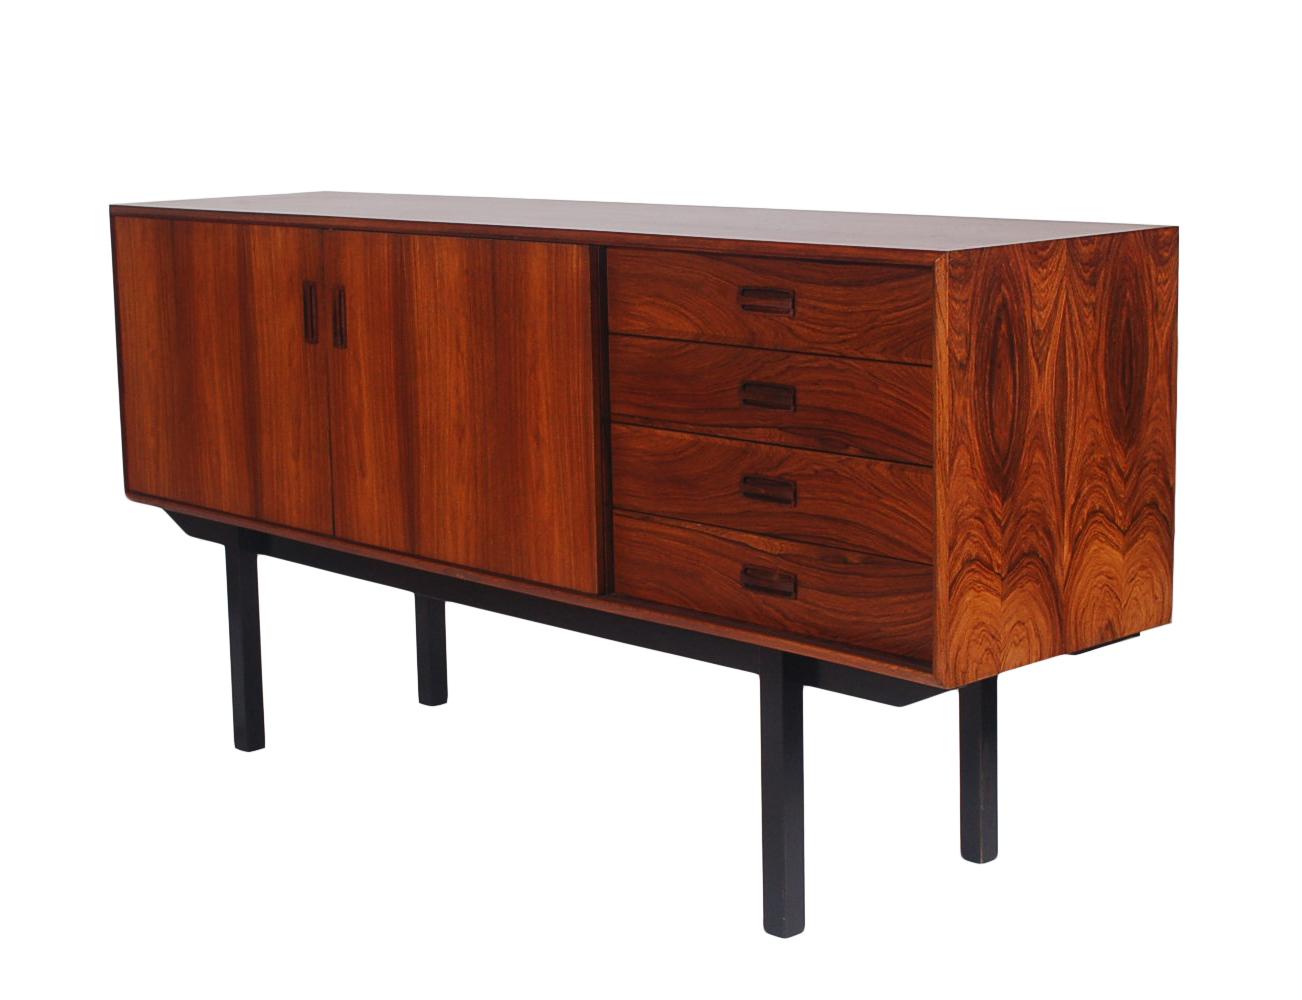 Late 20th Century Midcentury Danish Modern Credenza or Cabinet in Rosewood with Black Legs